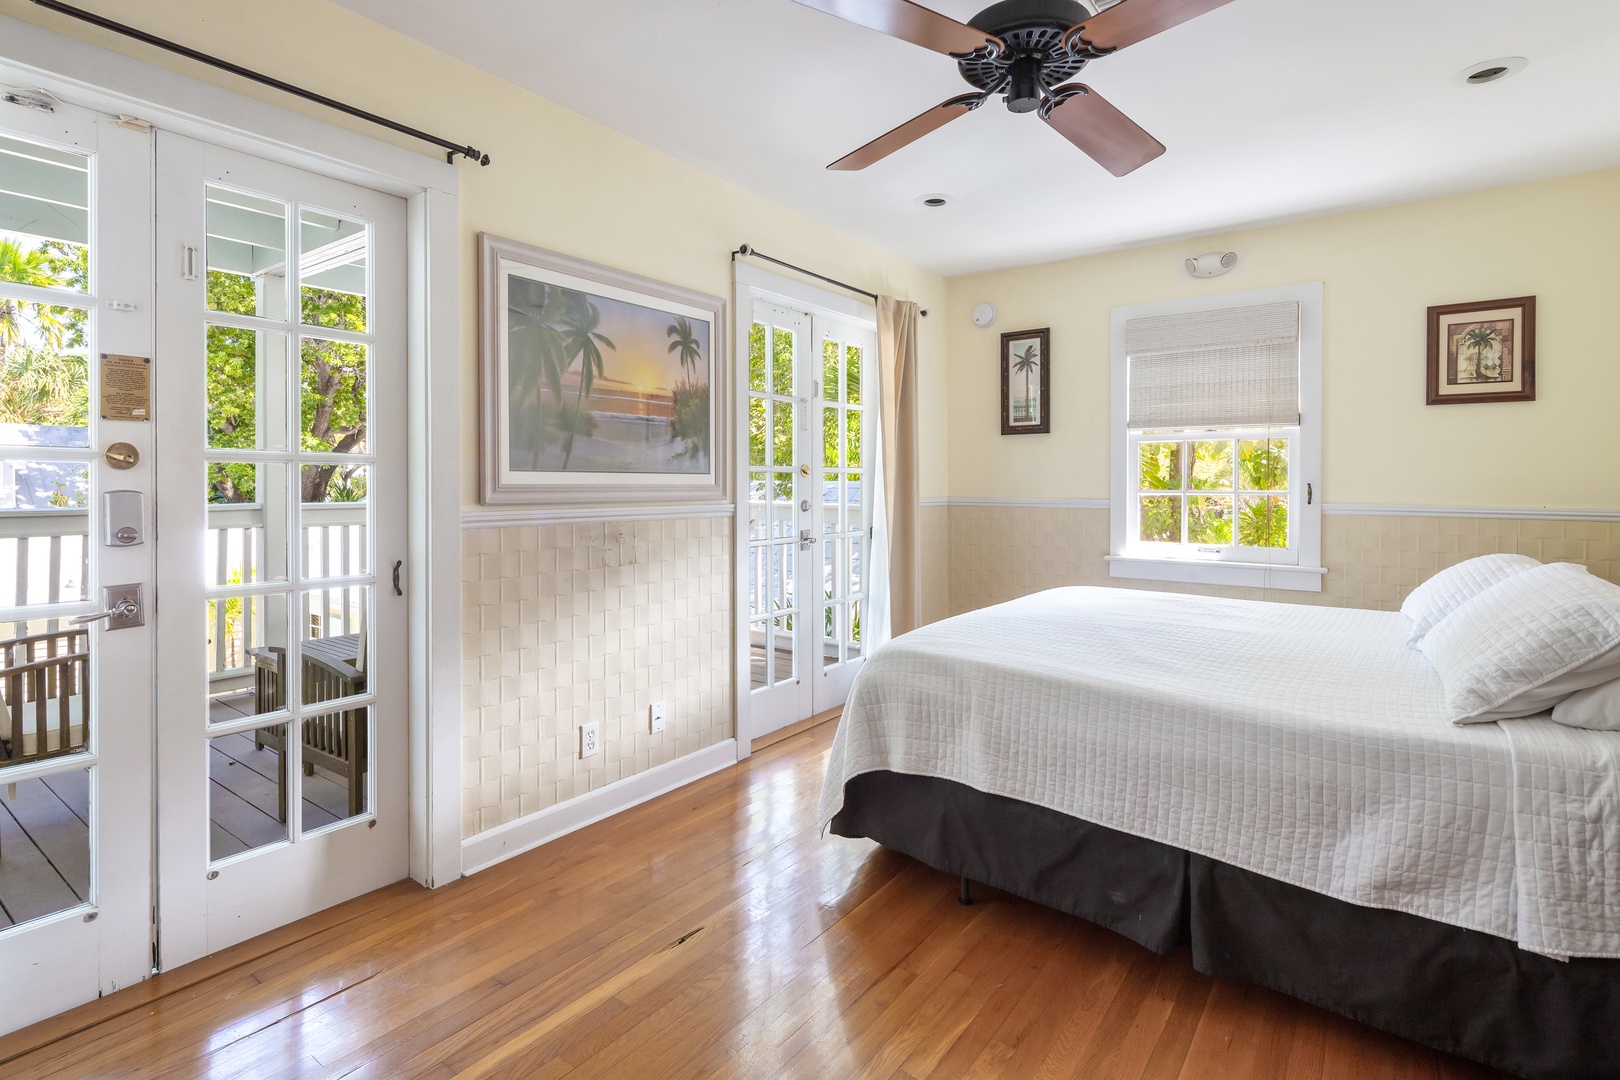 5th Bedroom Mansion @ The Watson House Key West